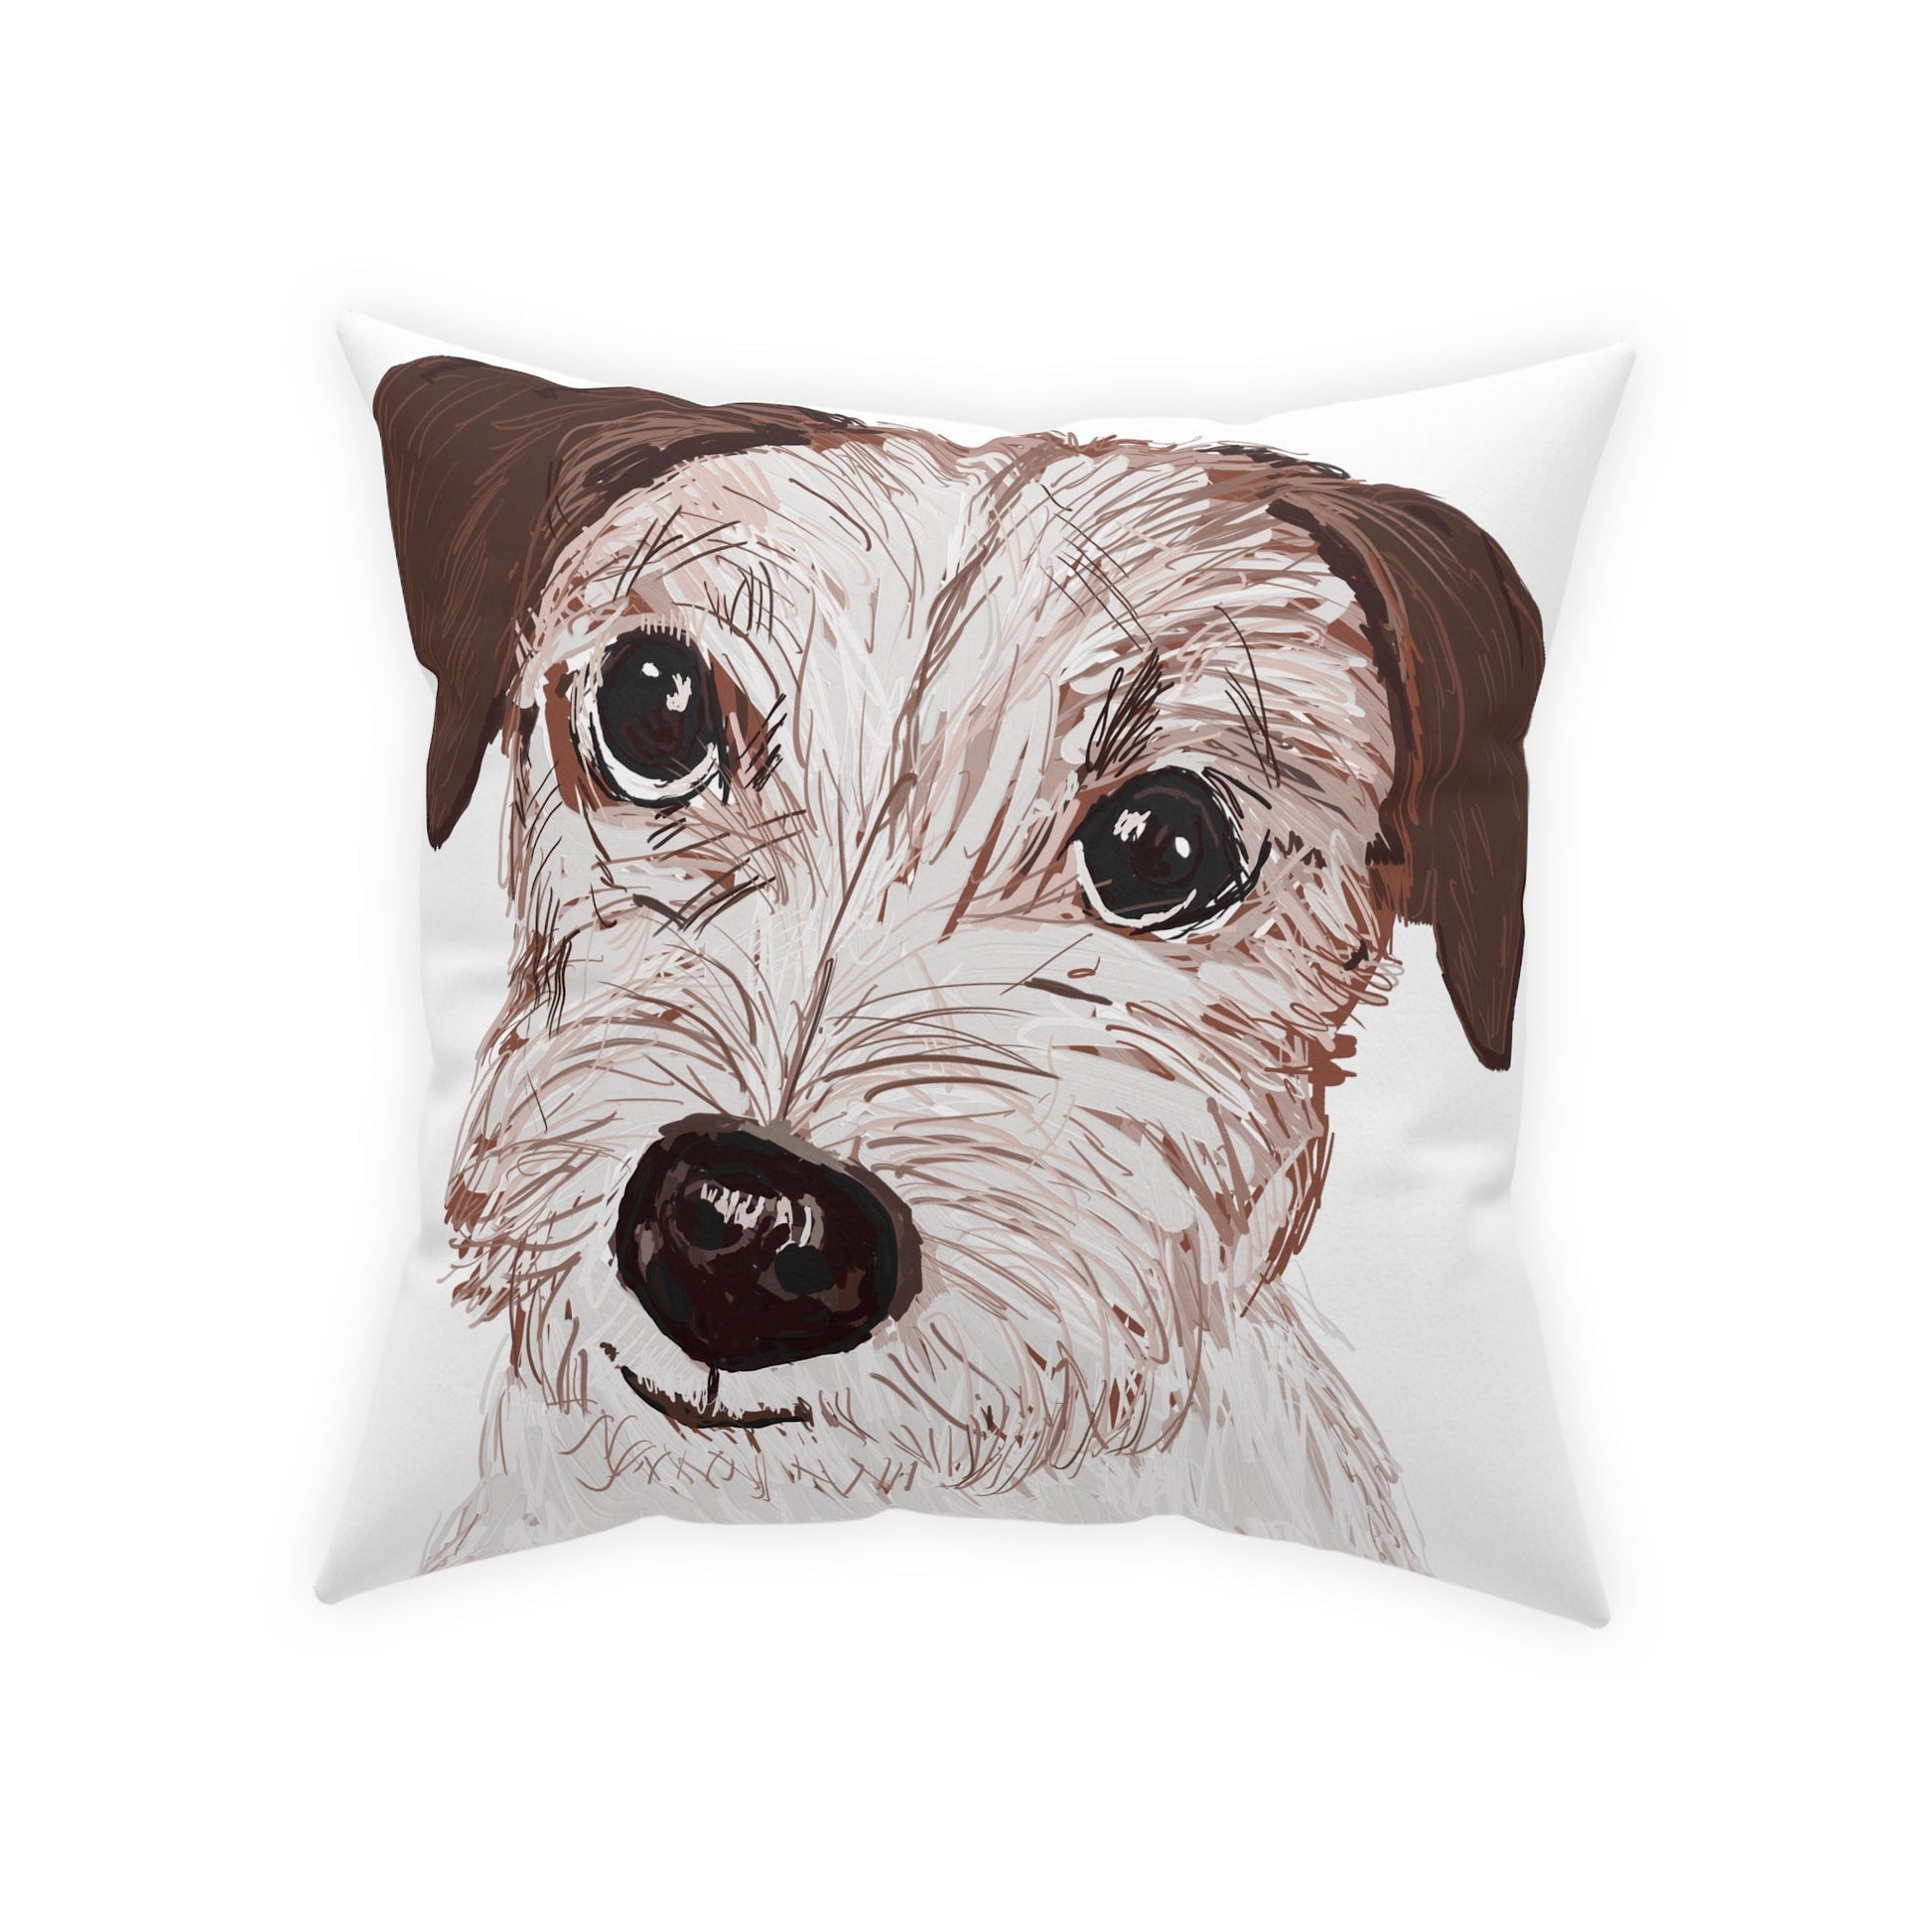 Jack Russell Broadcloth Pillow - Blue Cava